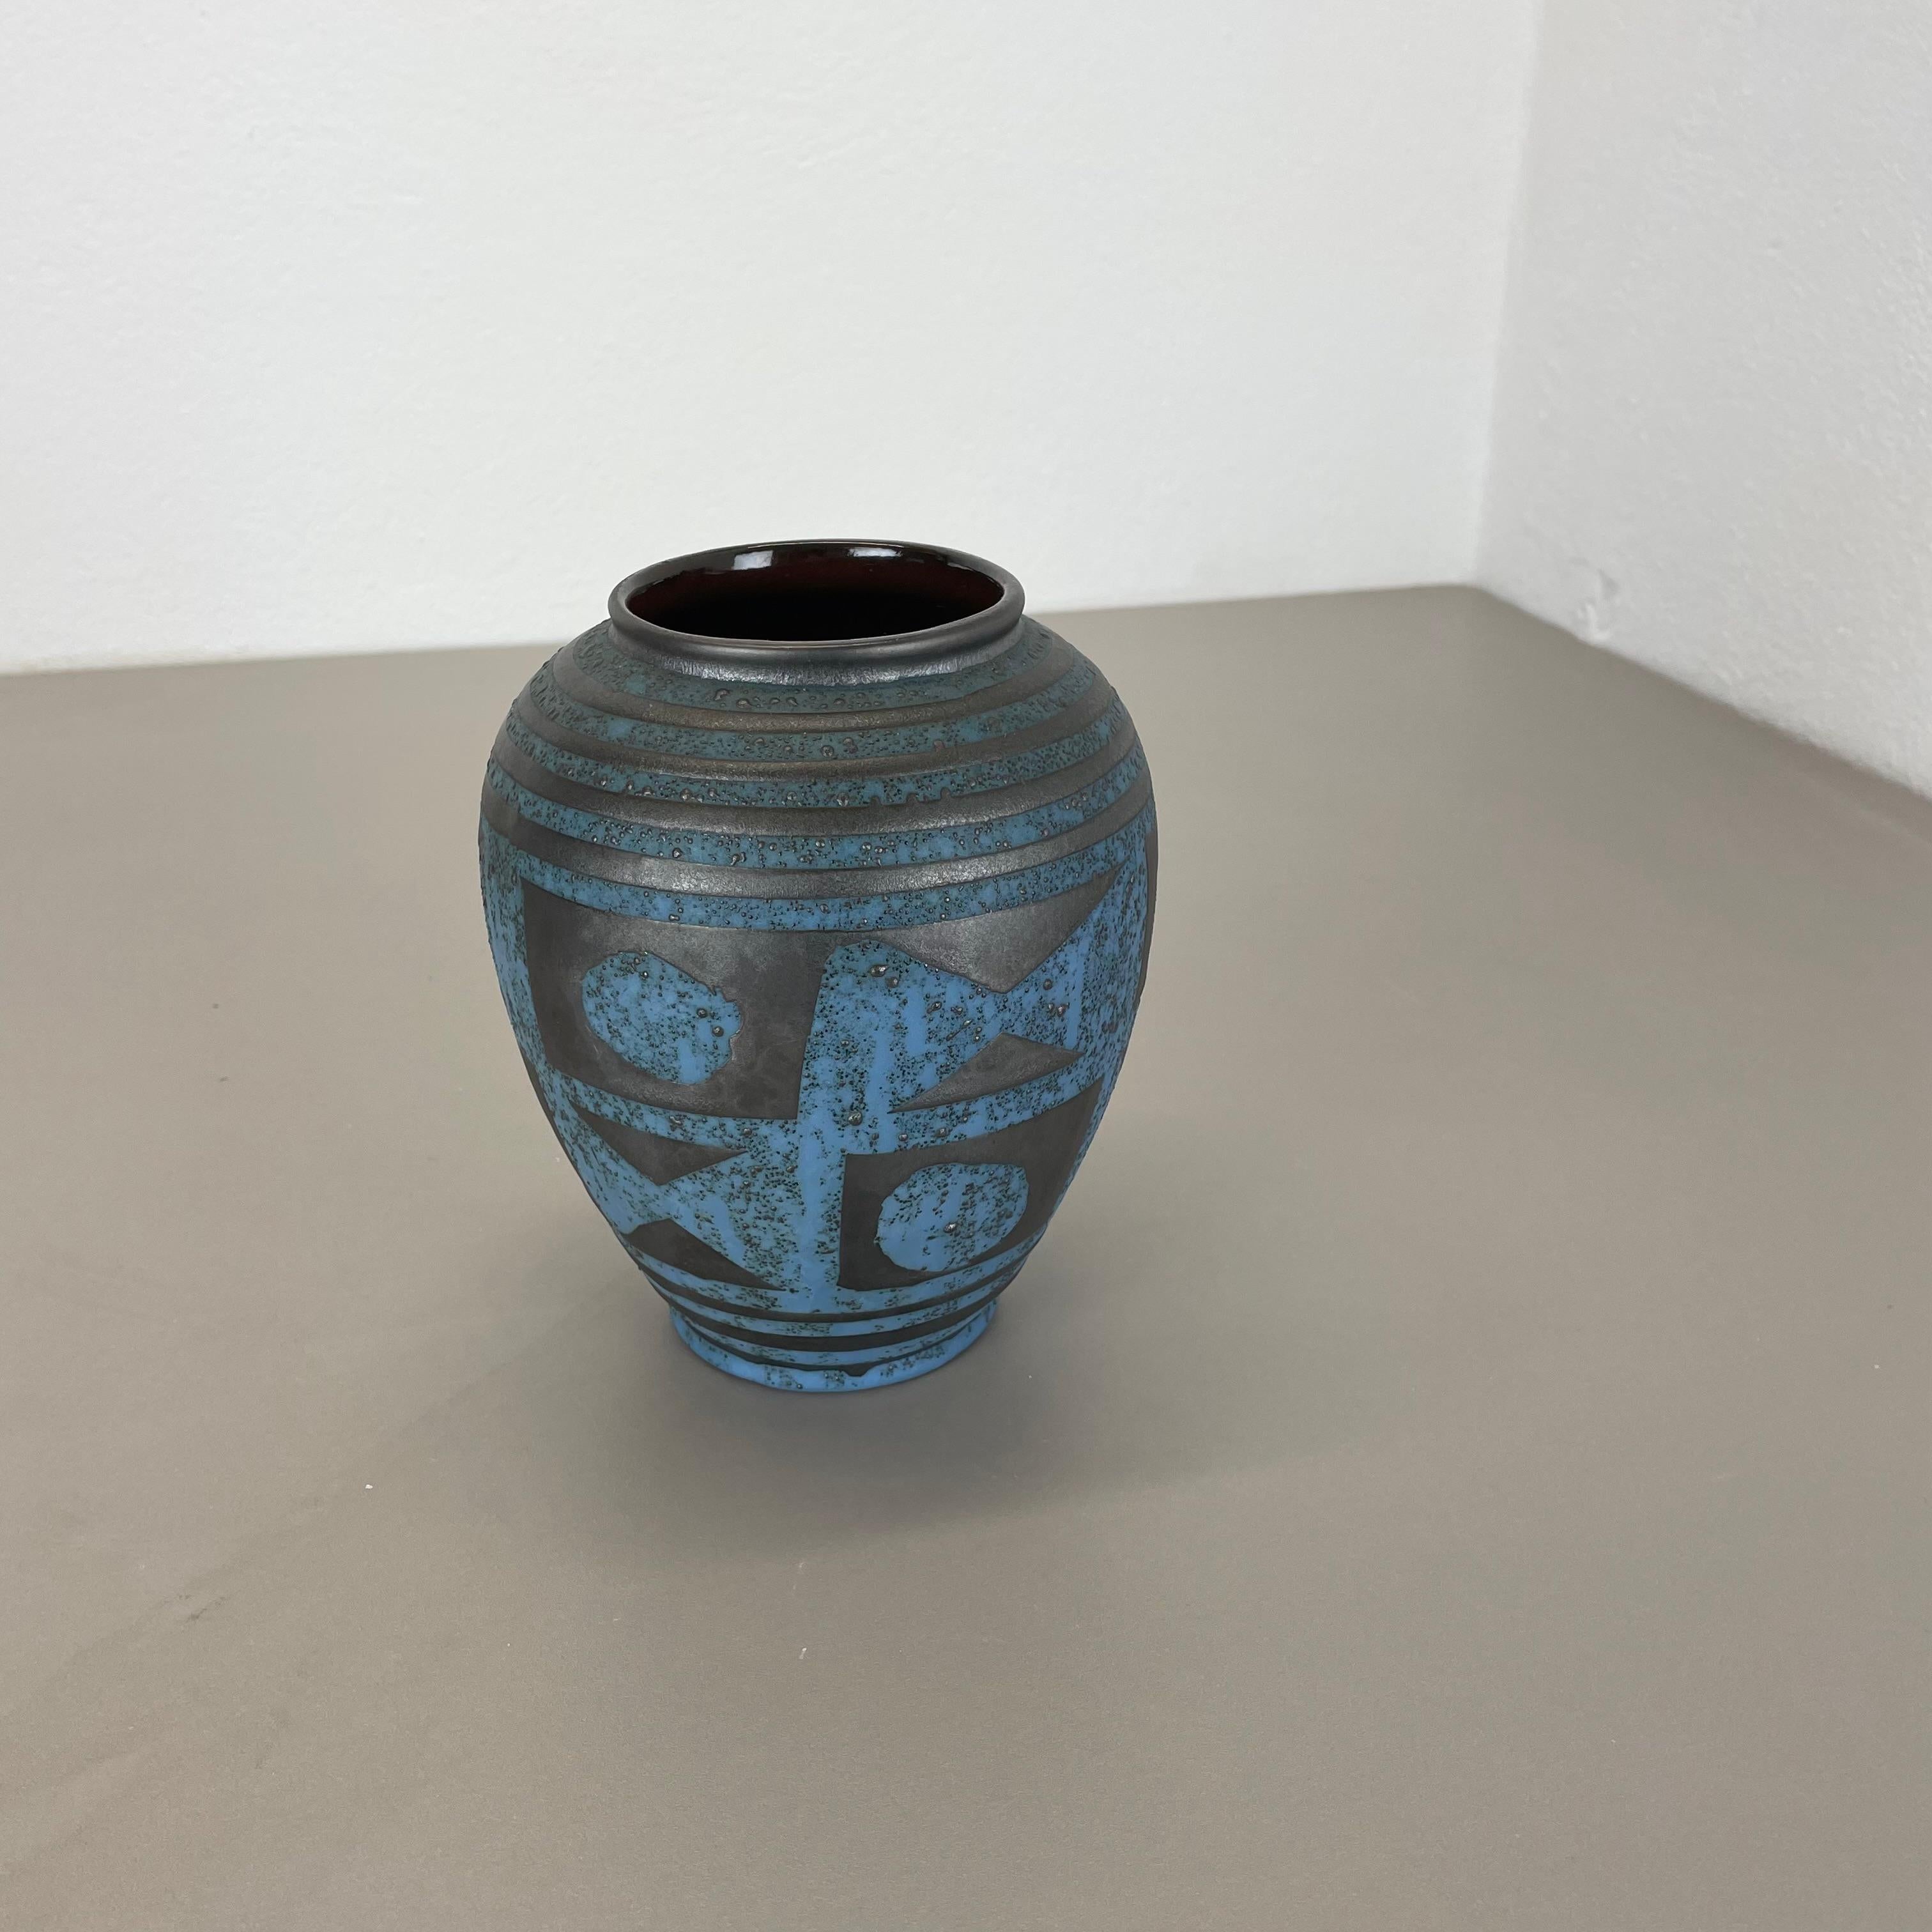 Article:

Ceramic pottery vase


Origin:

Germany


Designer:

Heinz Siery


Producer:

Carstens Tönnieshof, Germany


Decade:

1960s


This original vintage pottery object was designed by Heinz Siery and produced by Carstens Tönnieshof in the 1960s